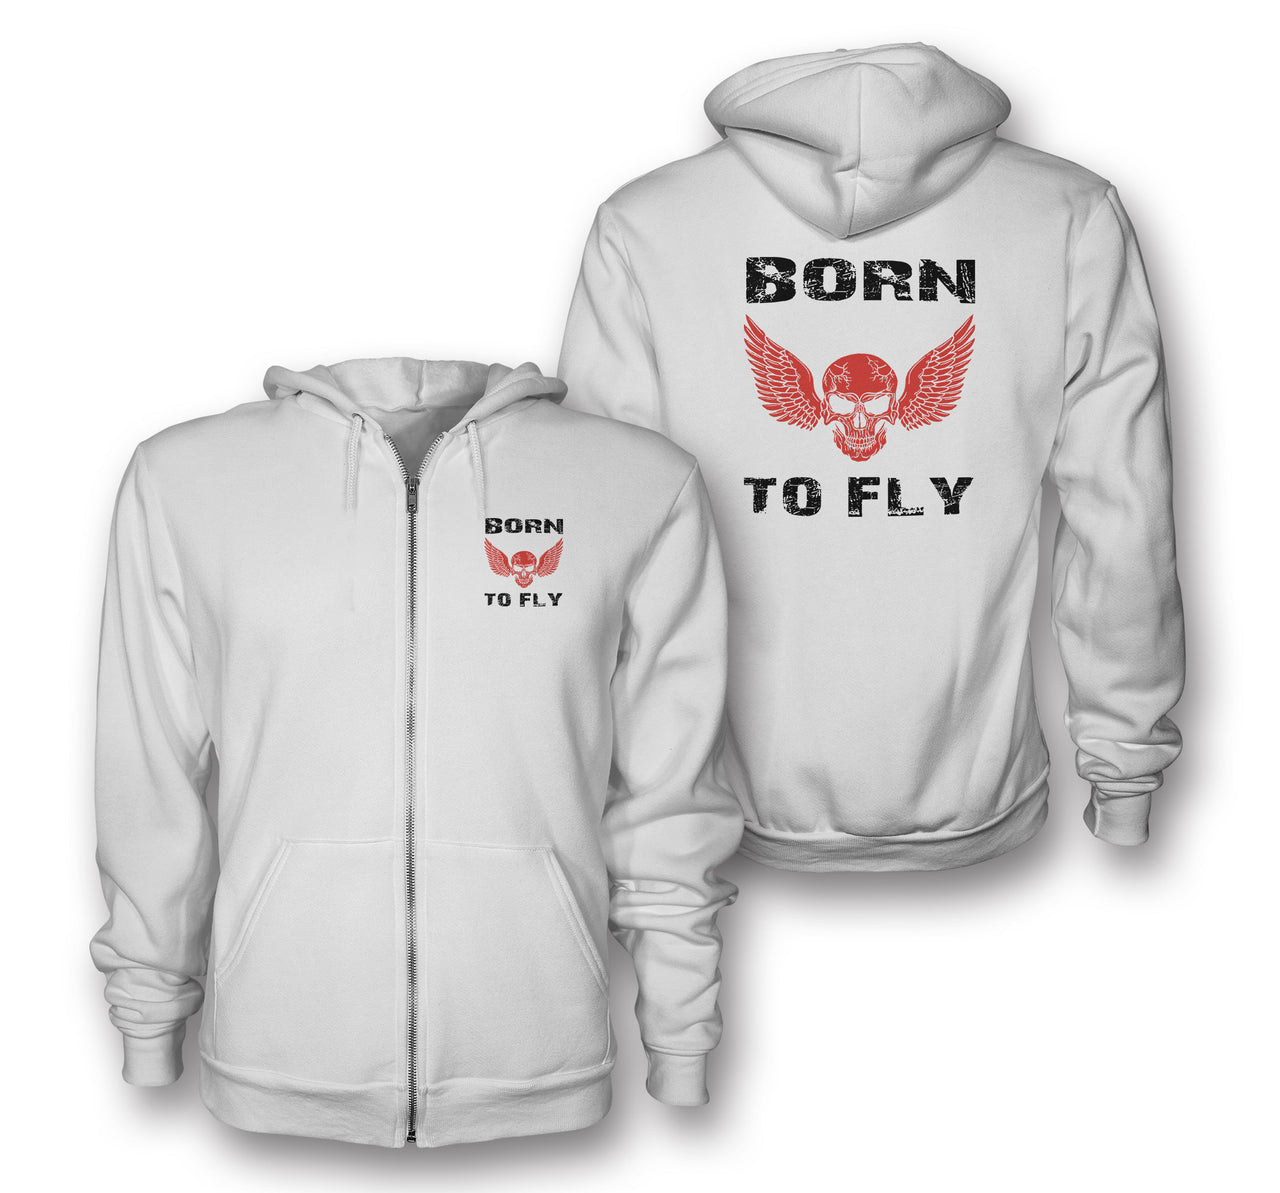 Born To Fly SKELETON Designed Zipped Hoodies